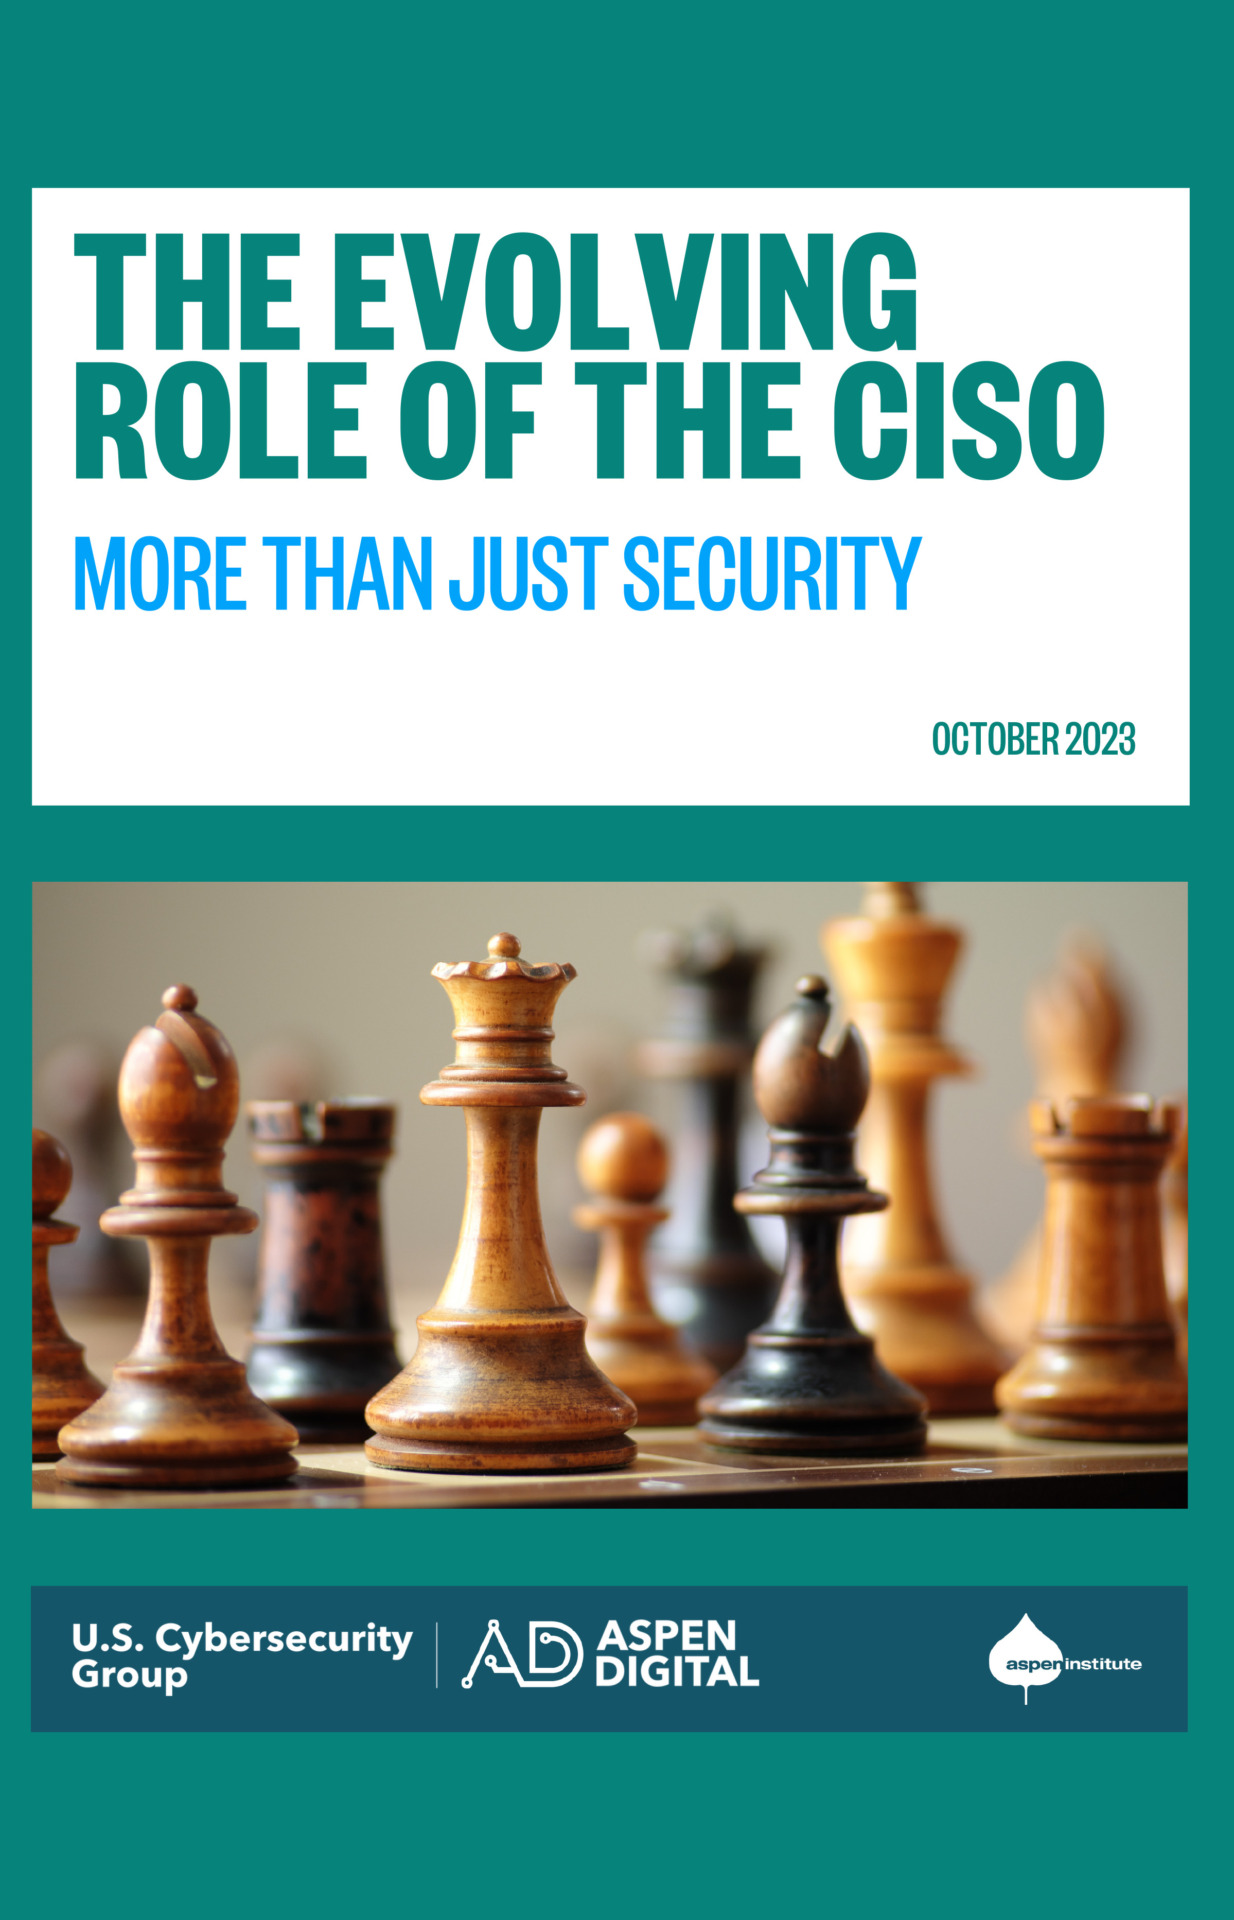 The Evolving Role of the CISO